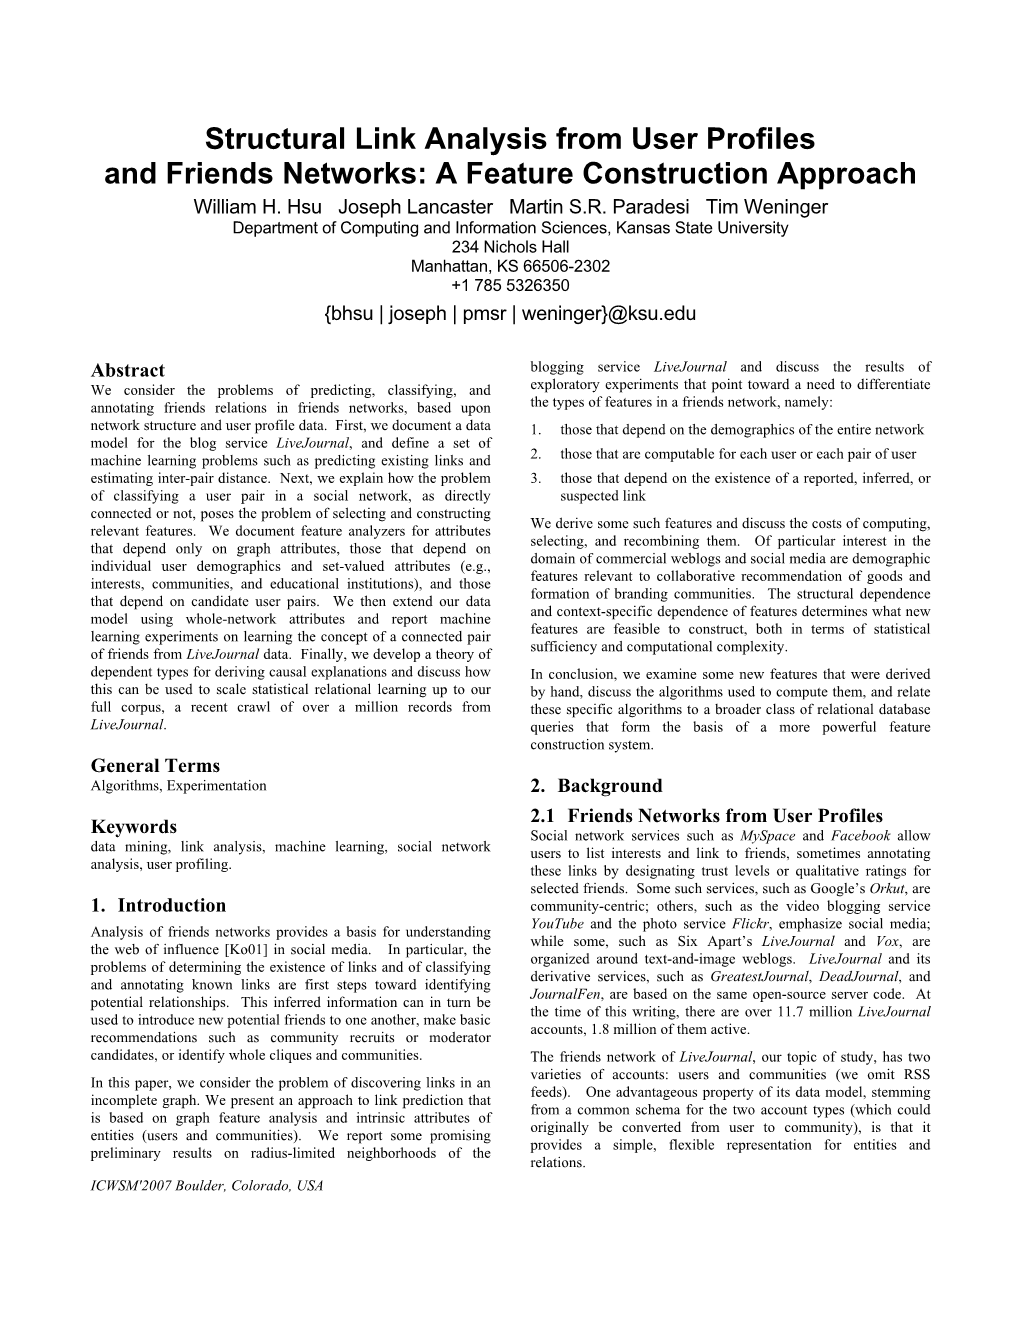 Structural Link Analysis from User Profiles and Friends Networks: a Feature Construction Approach William H